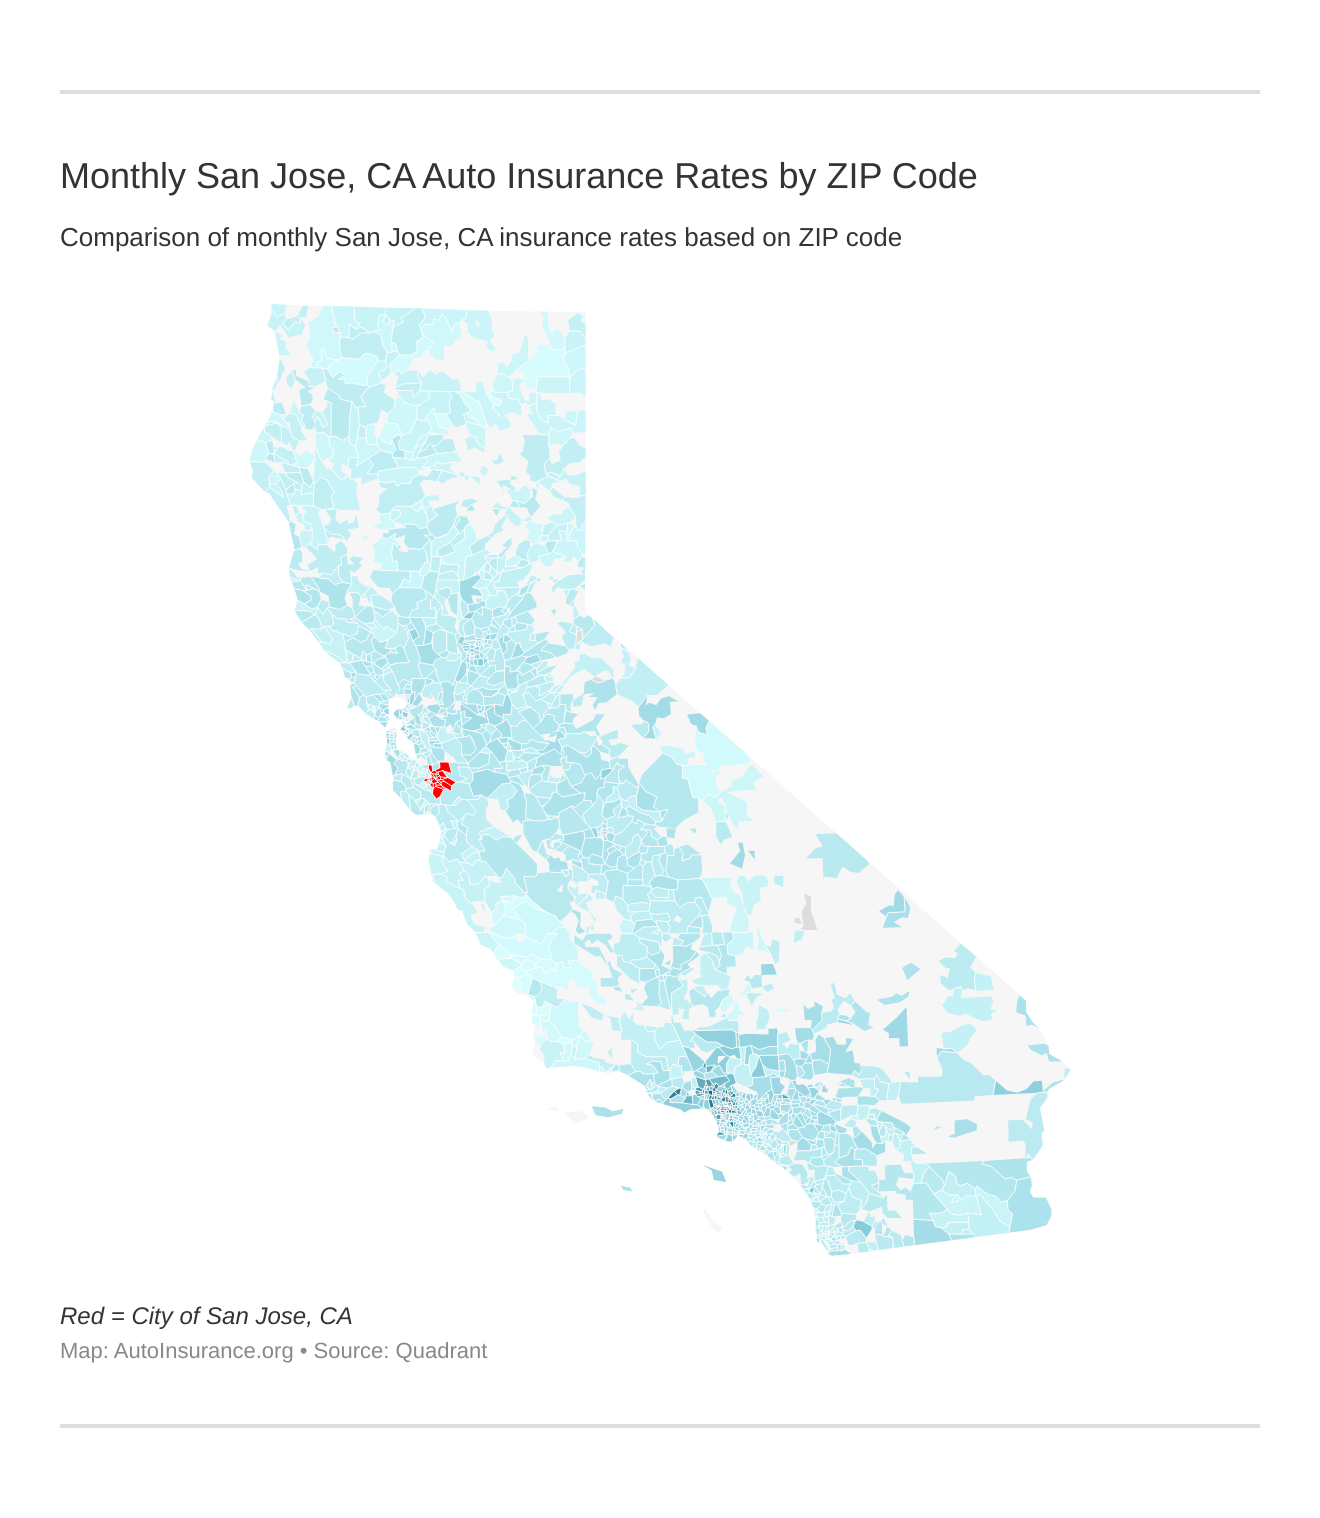 Monthly San Jose, CA Auto Insurance Rates by ZIP Code